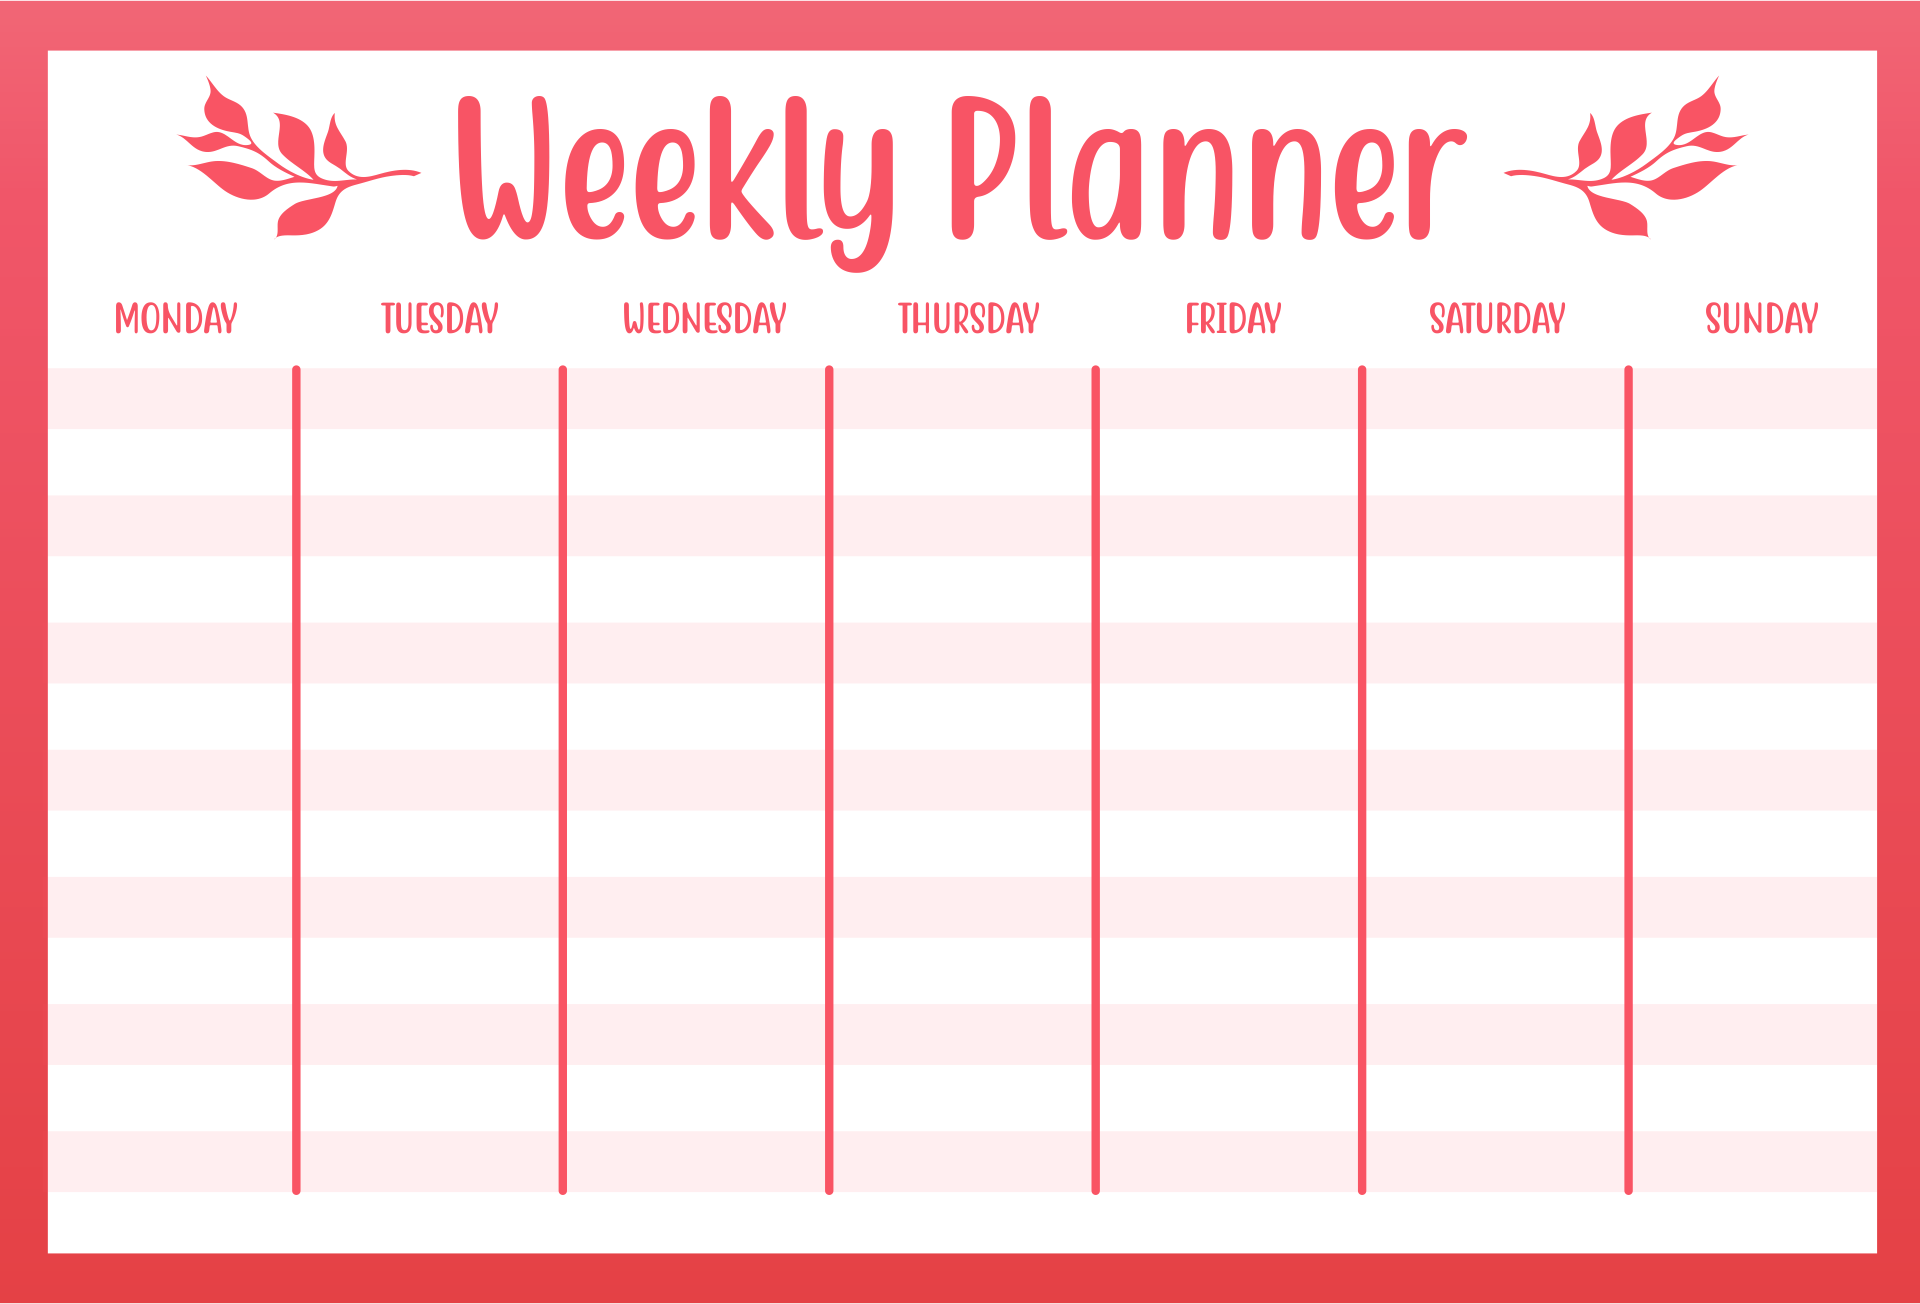 printable-weekly-schedule-with-times